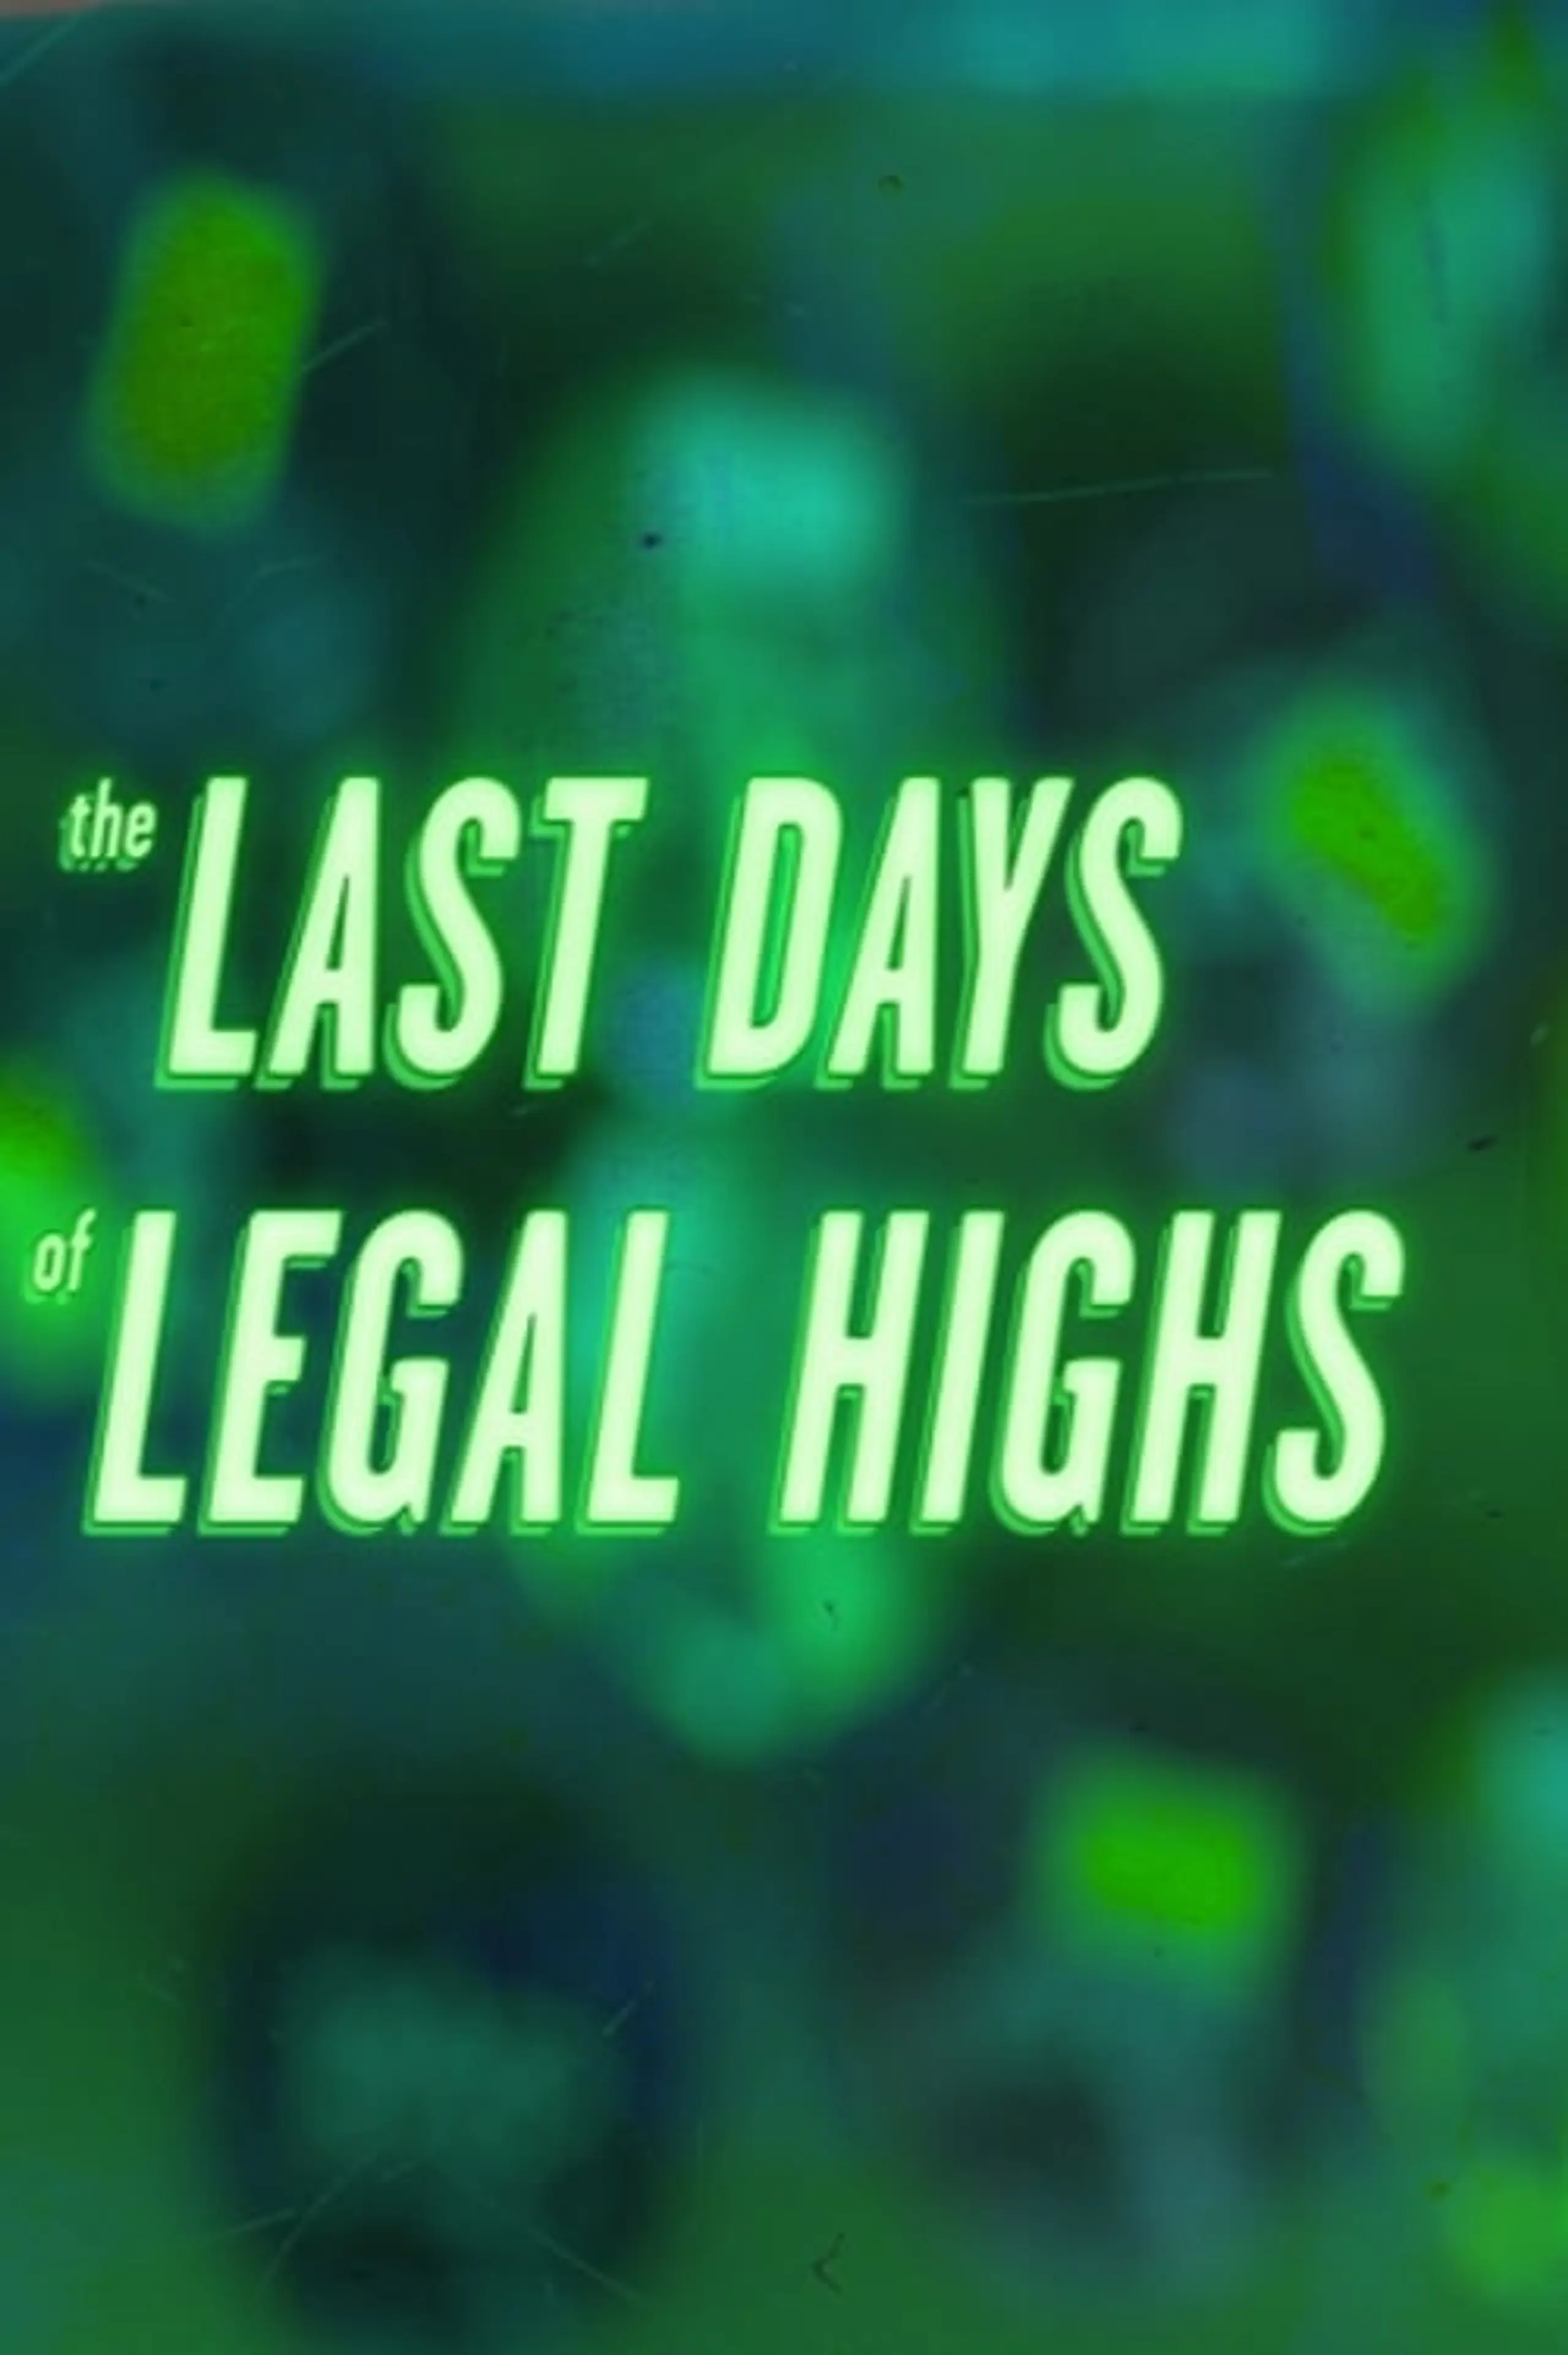 The Last Days of Legal Highs